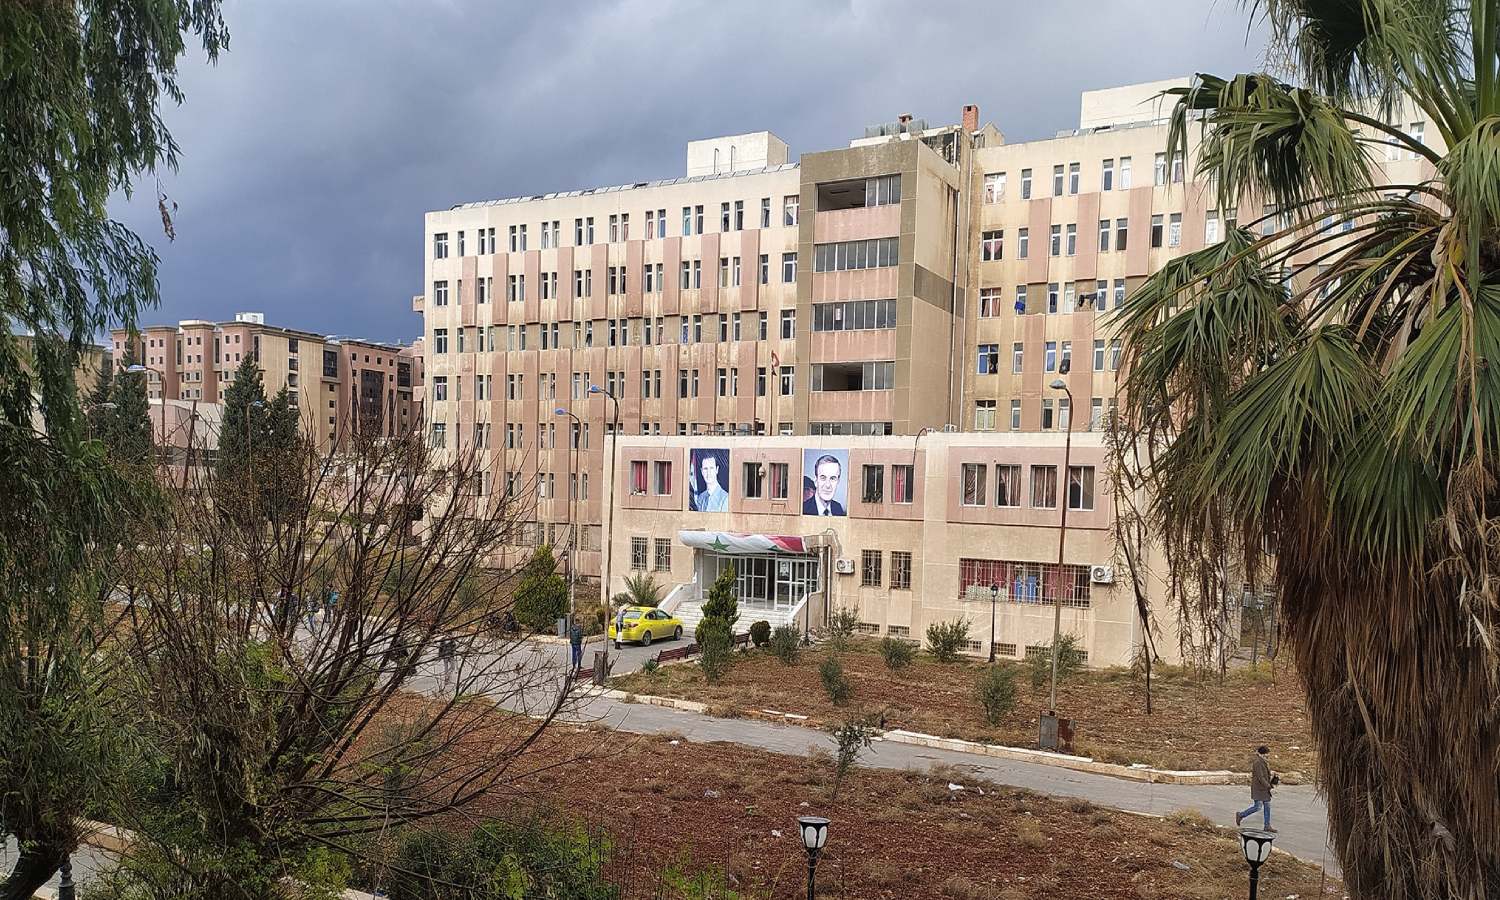 The dormitory of Homs University in central Syria (Bassel al-Assad’s dormitory’s Facebook page)